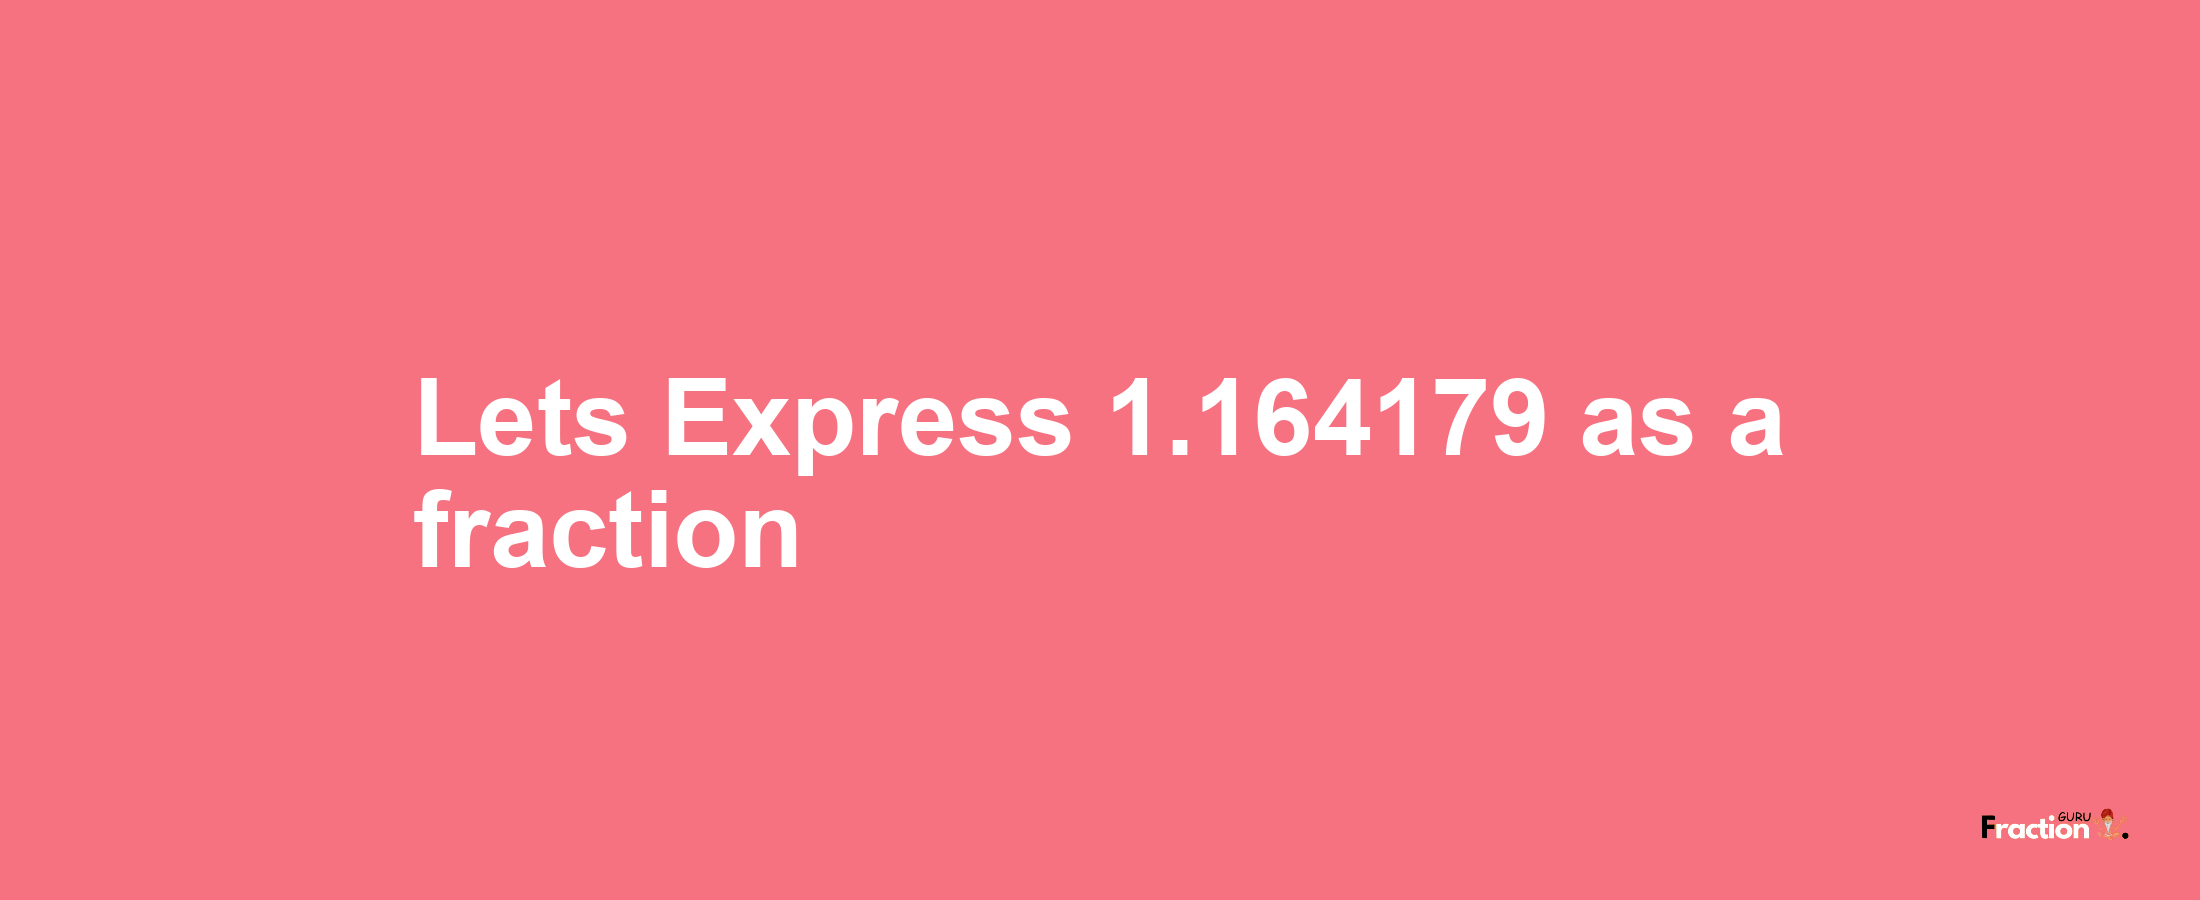 Lets Express 1.164179 as afraction